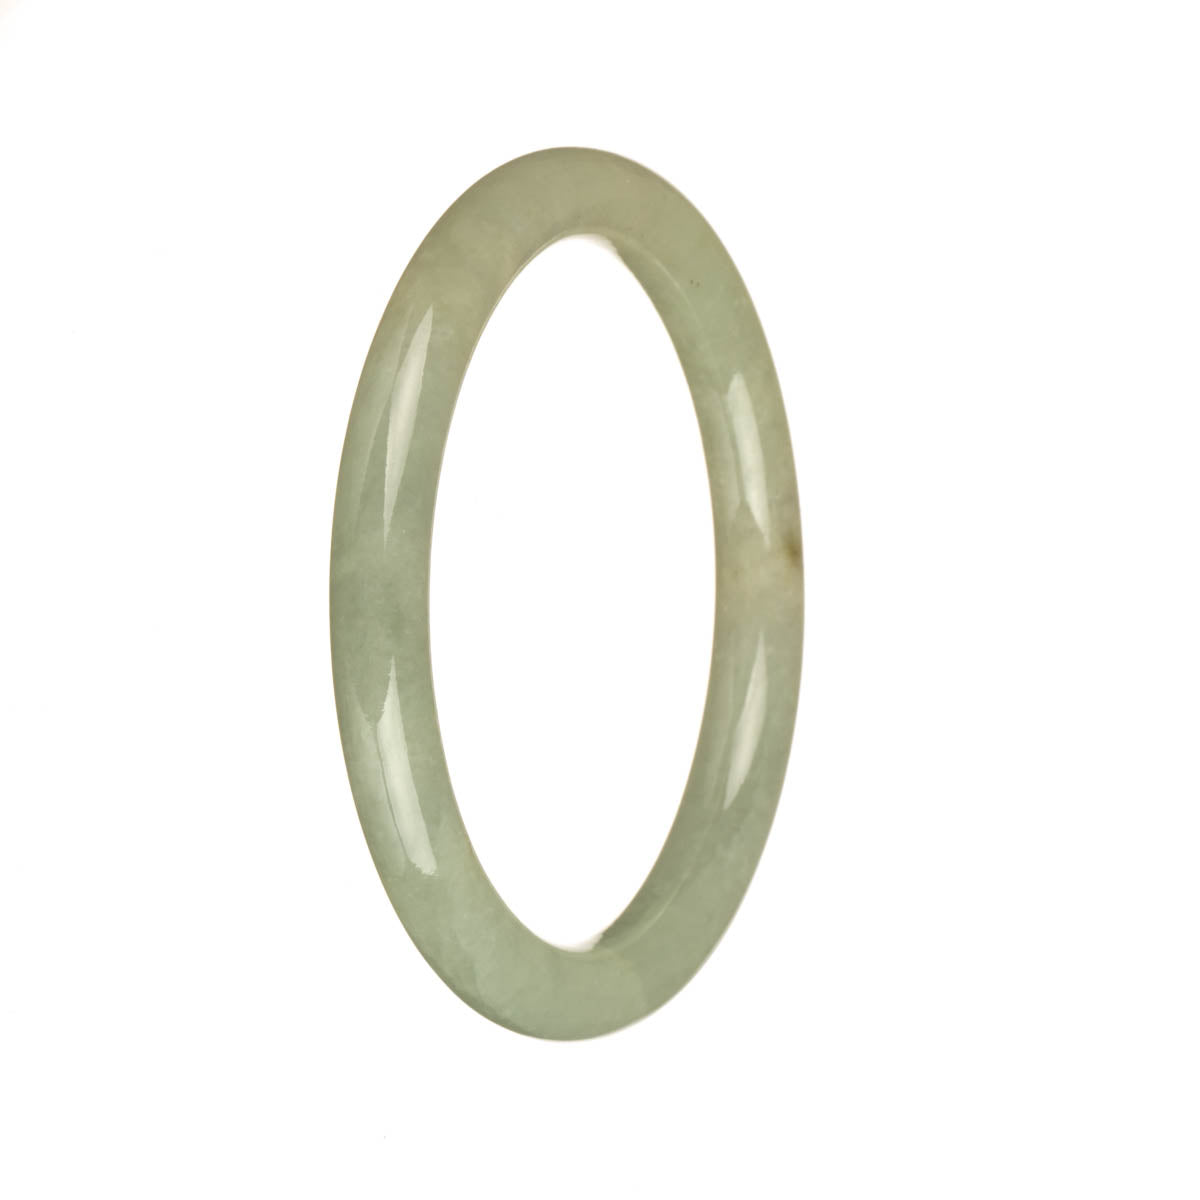 A delicate and elegant pale green jade bangle bracelet with a petite round shape, made from high-quality grade A jade. Perfect for adding a touch of natural beauty to any outfit.